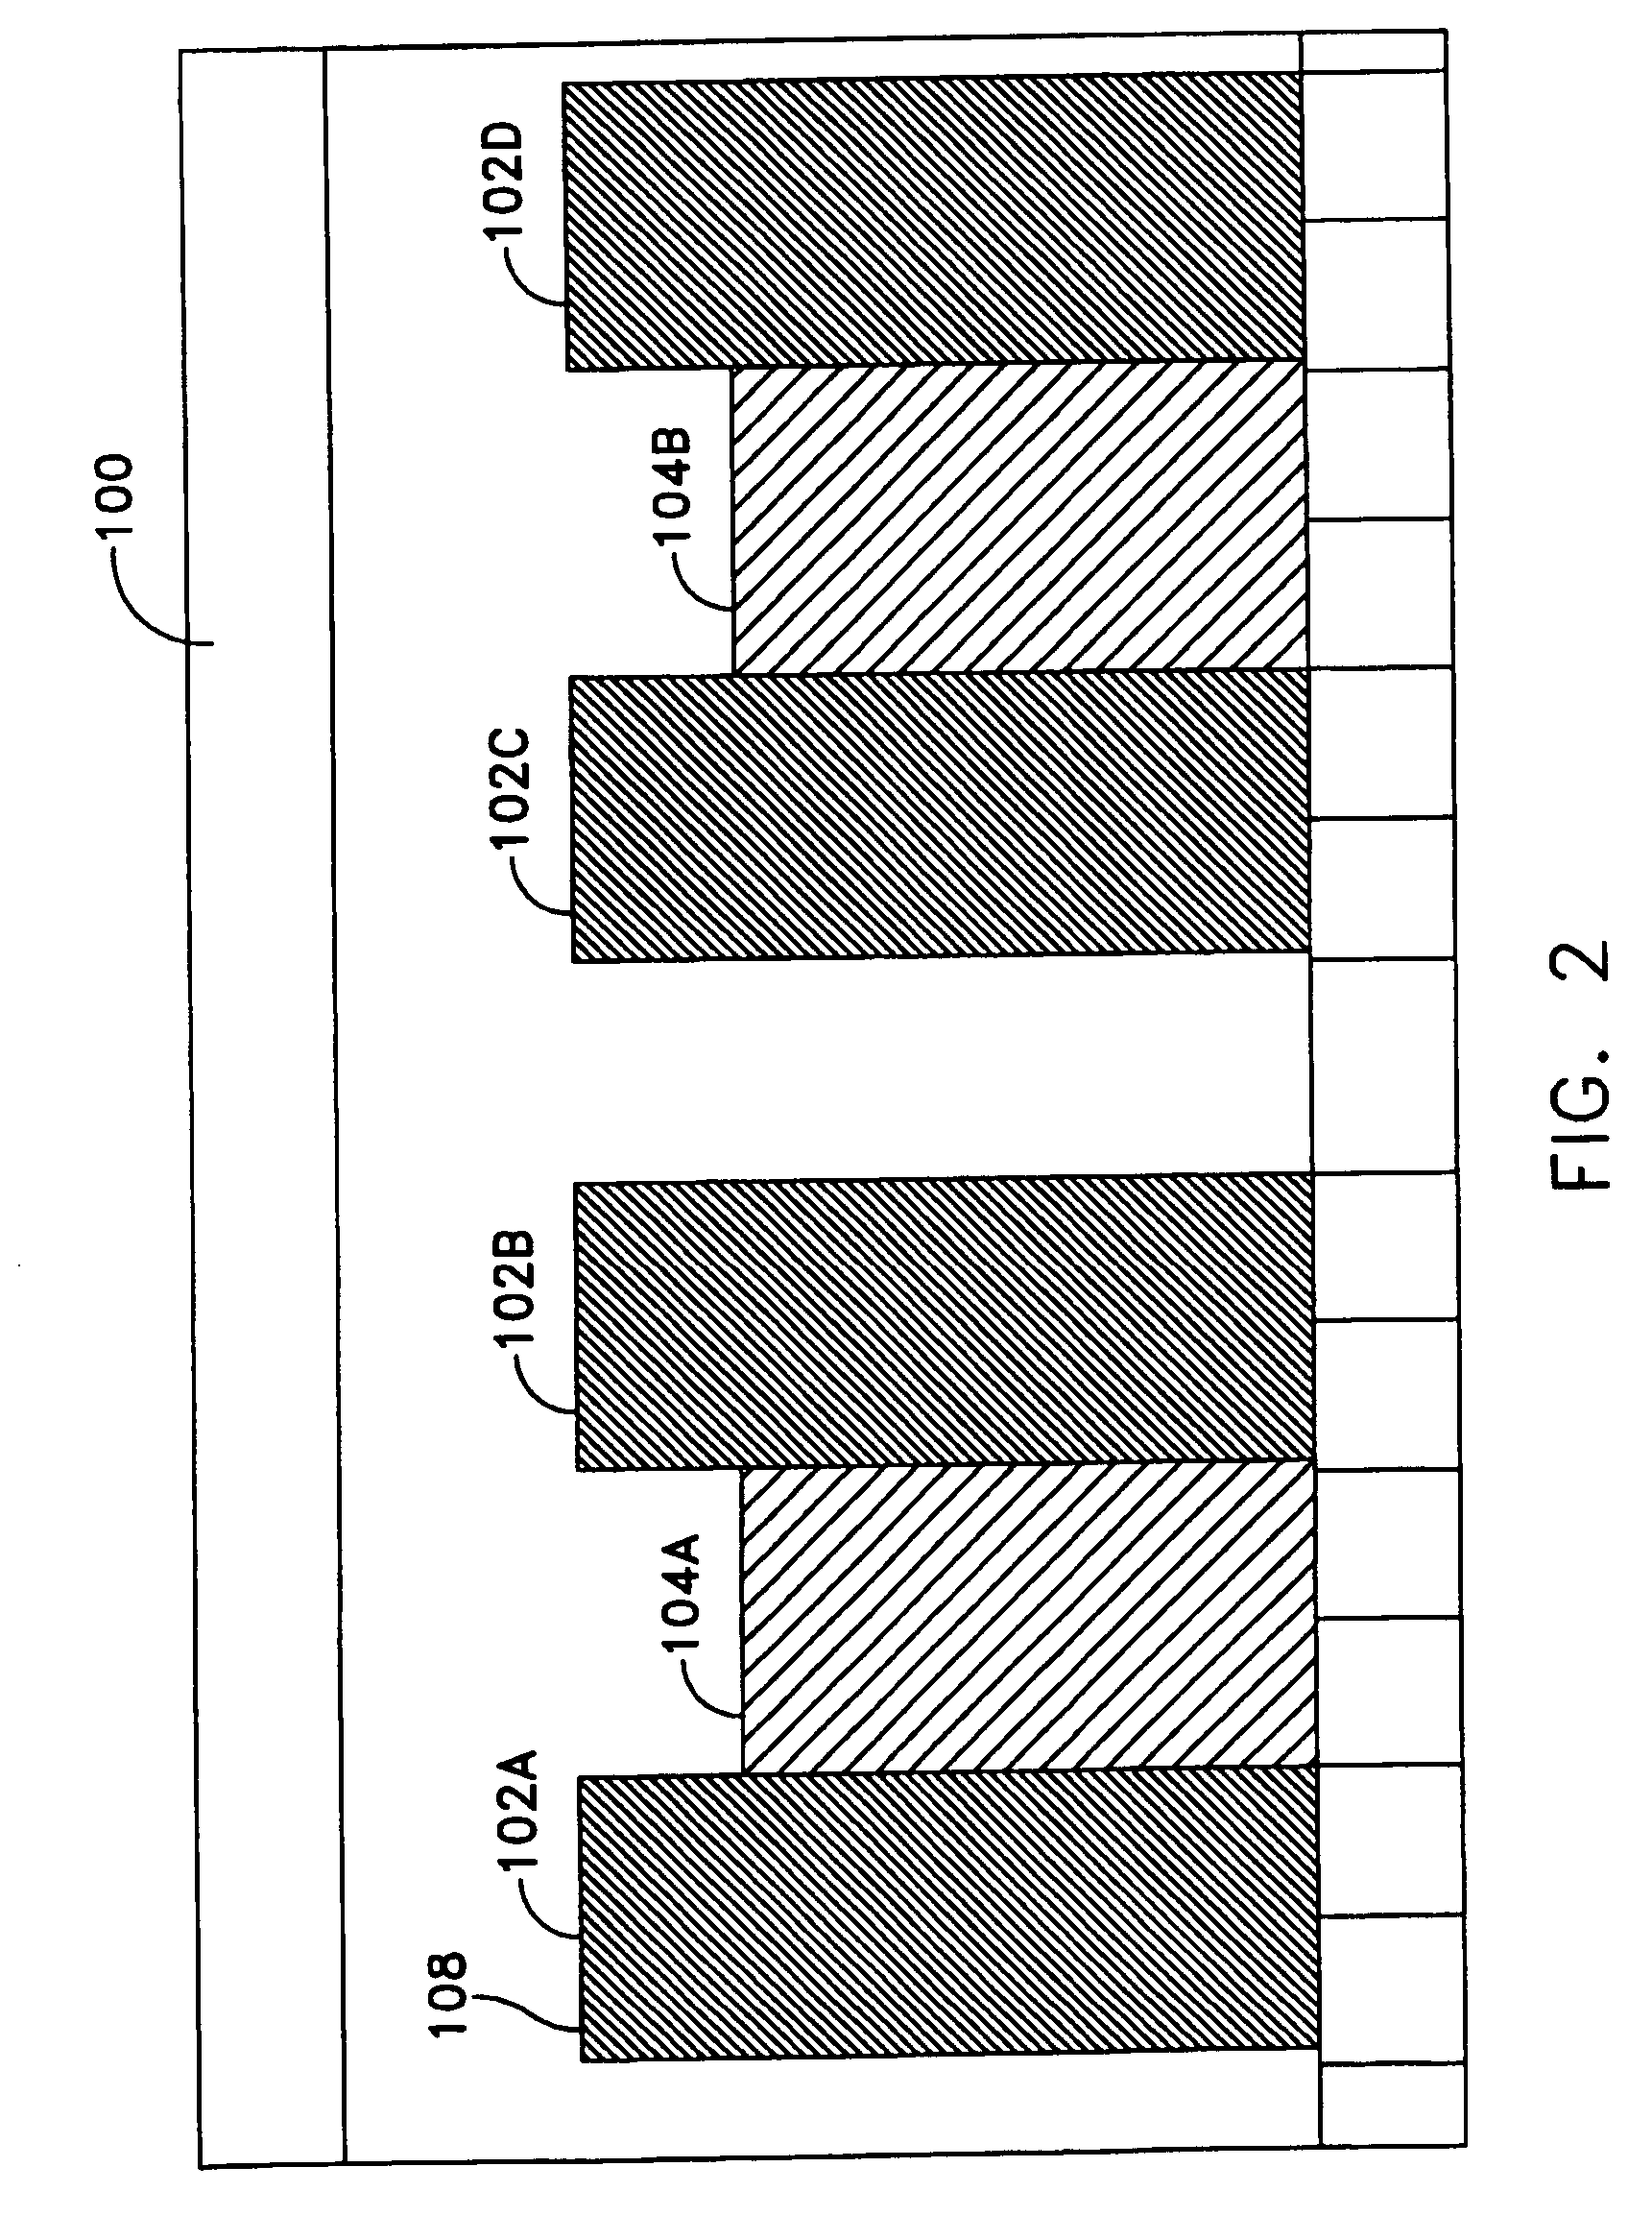 Methods and systems for managing facility power and cooling